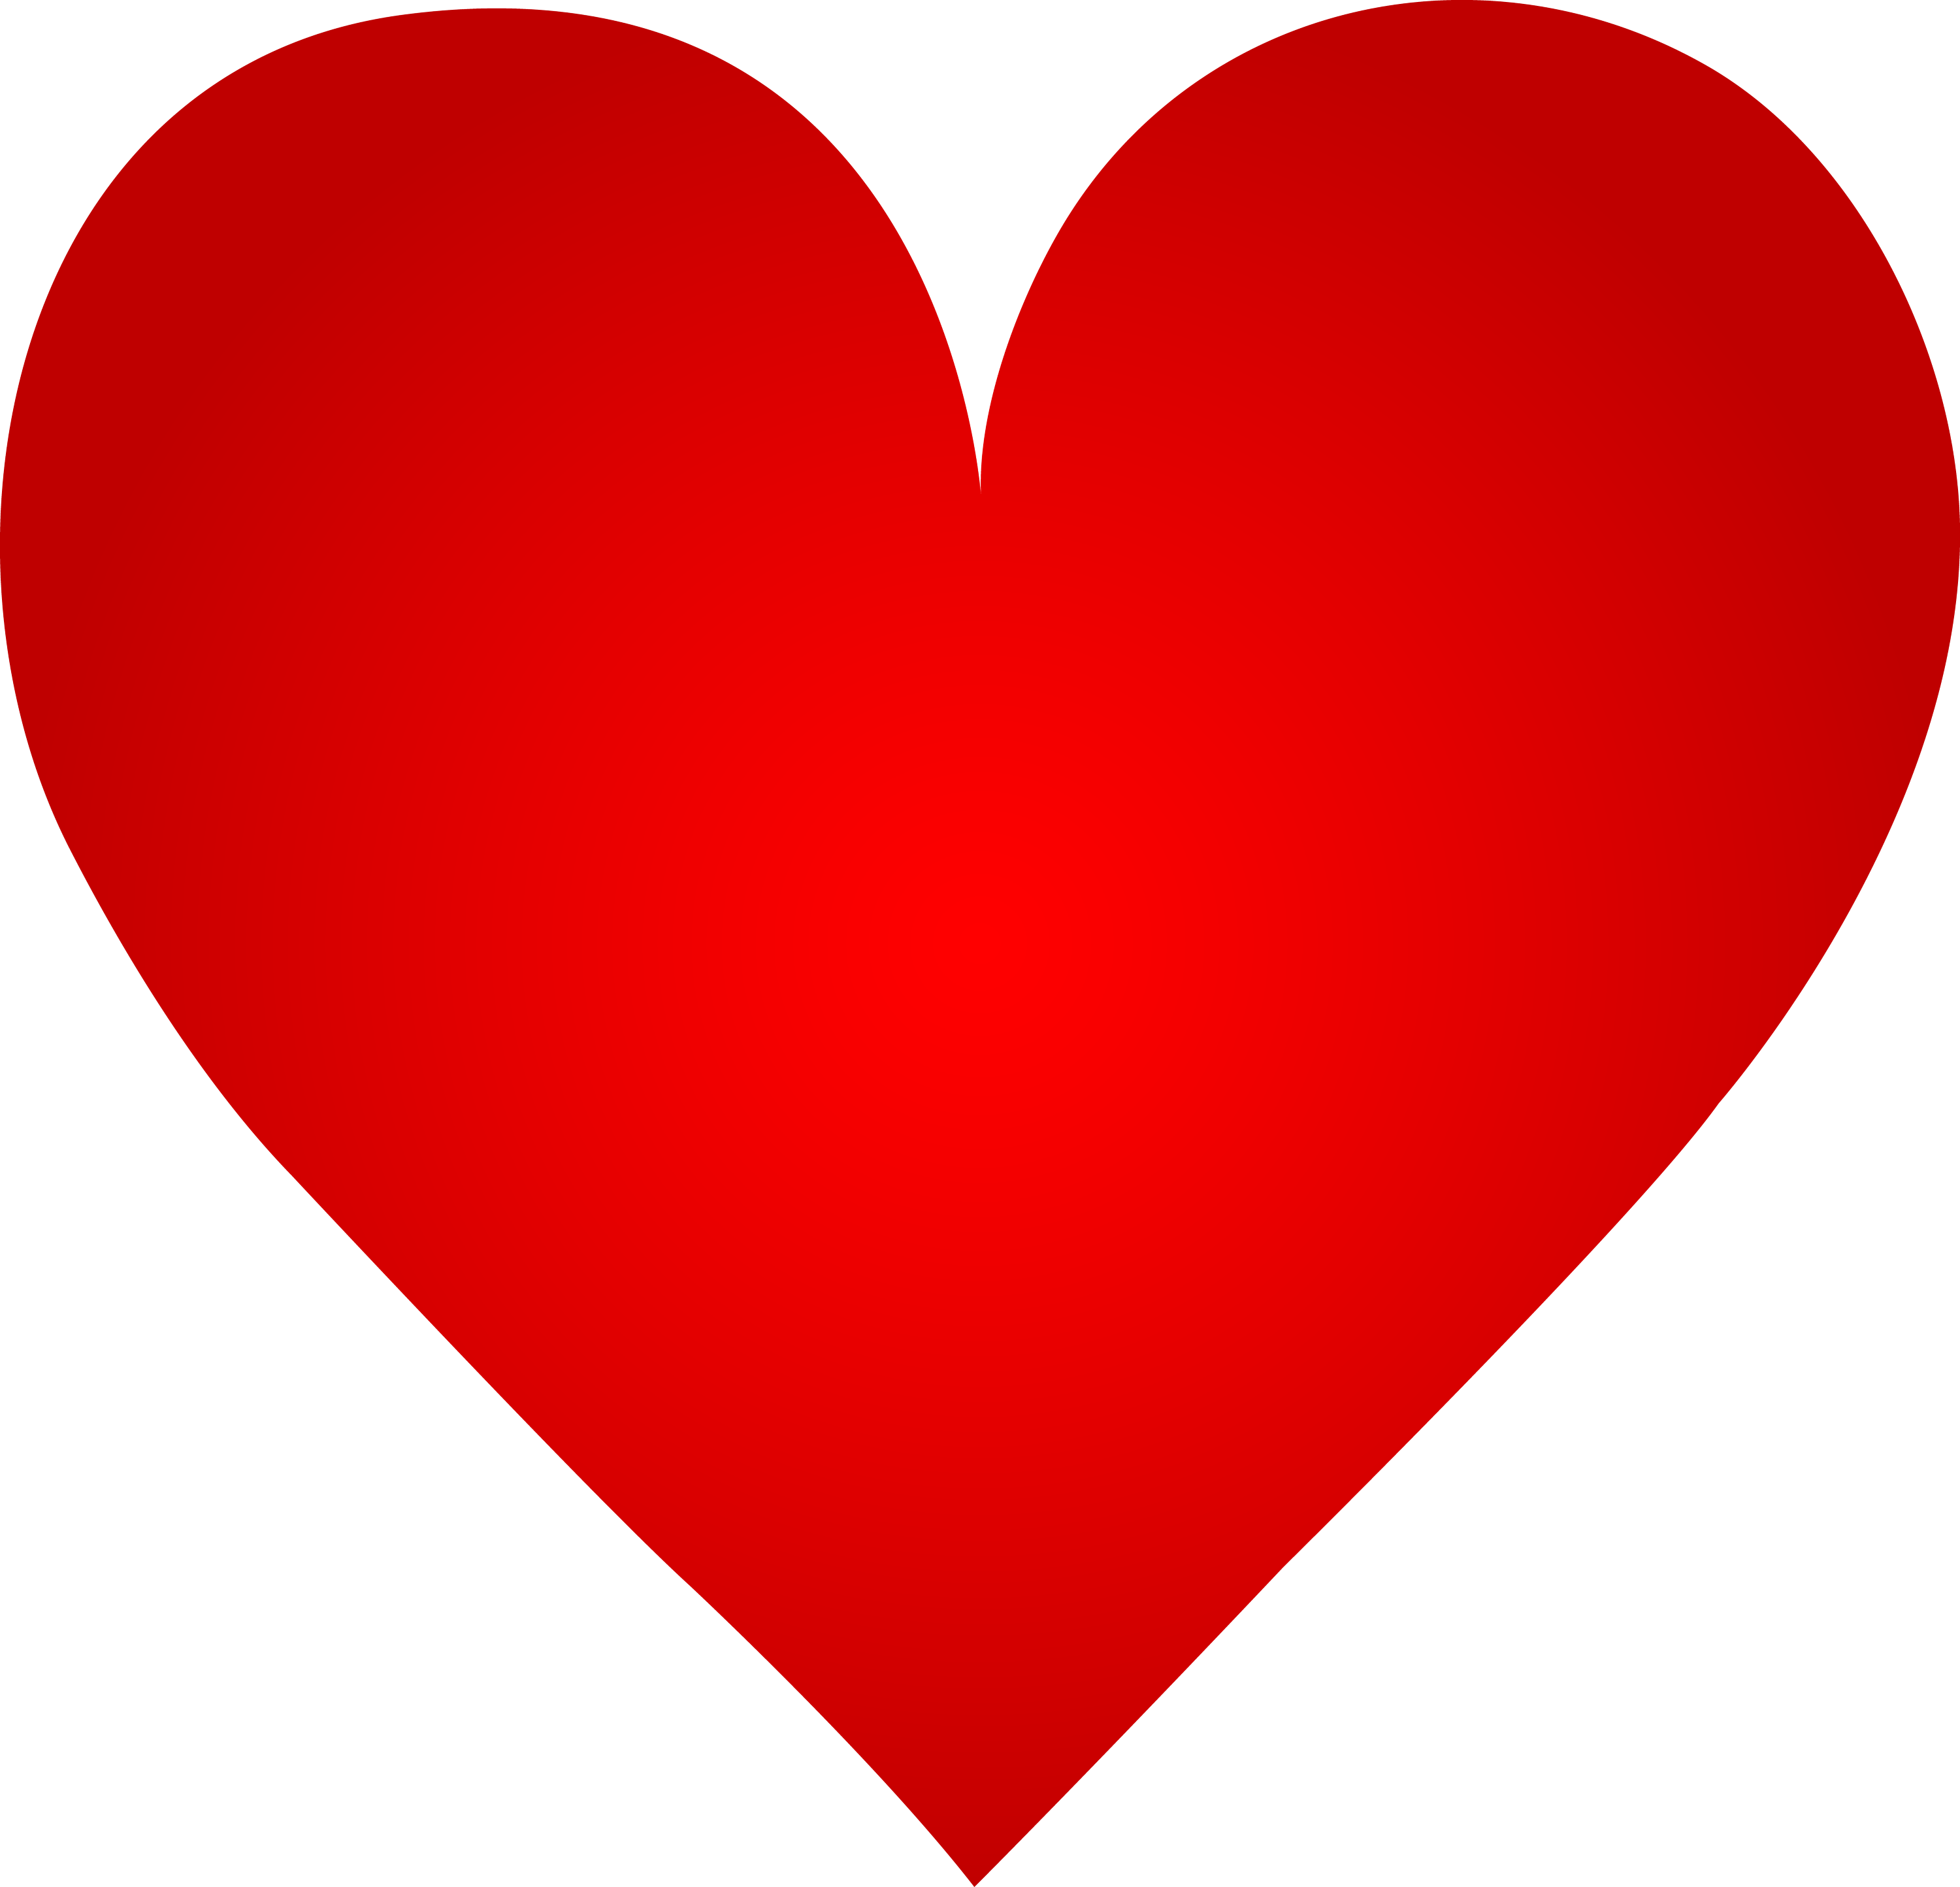 clipart heart images free - photo #41